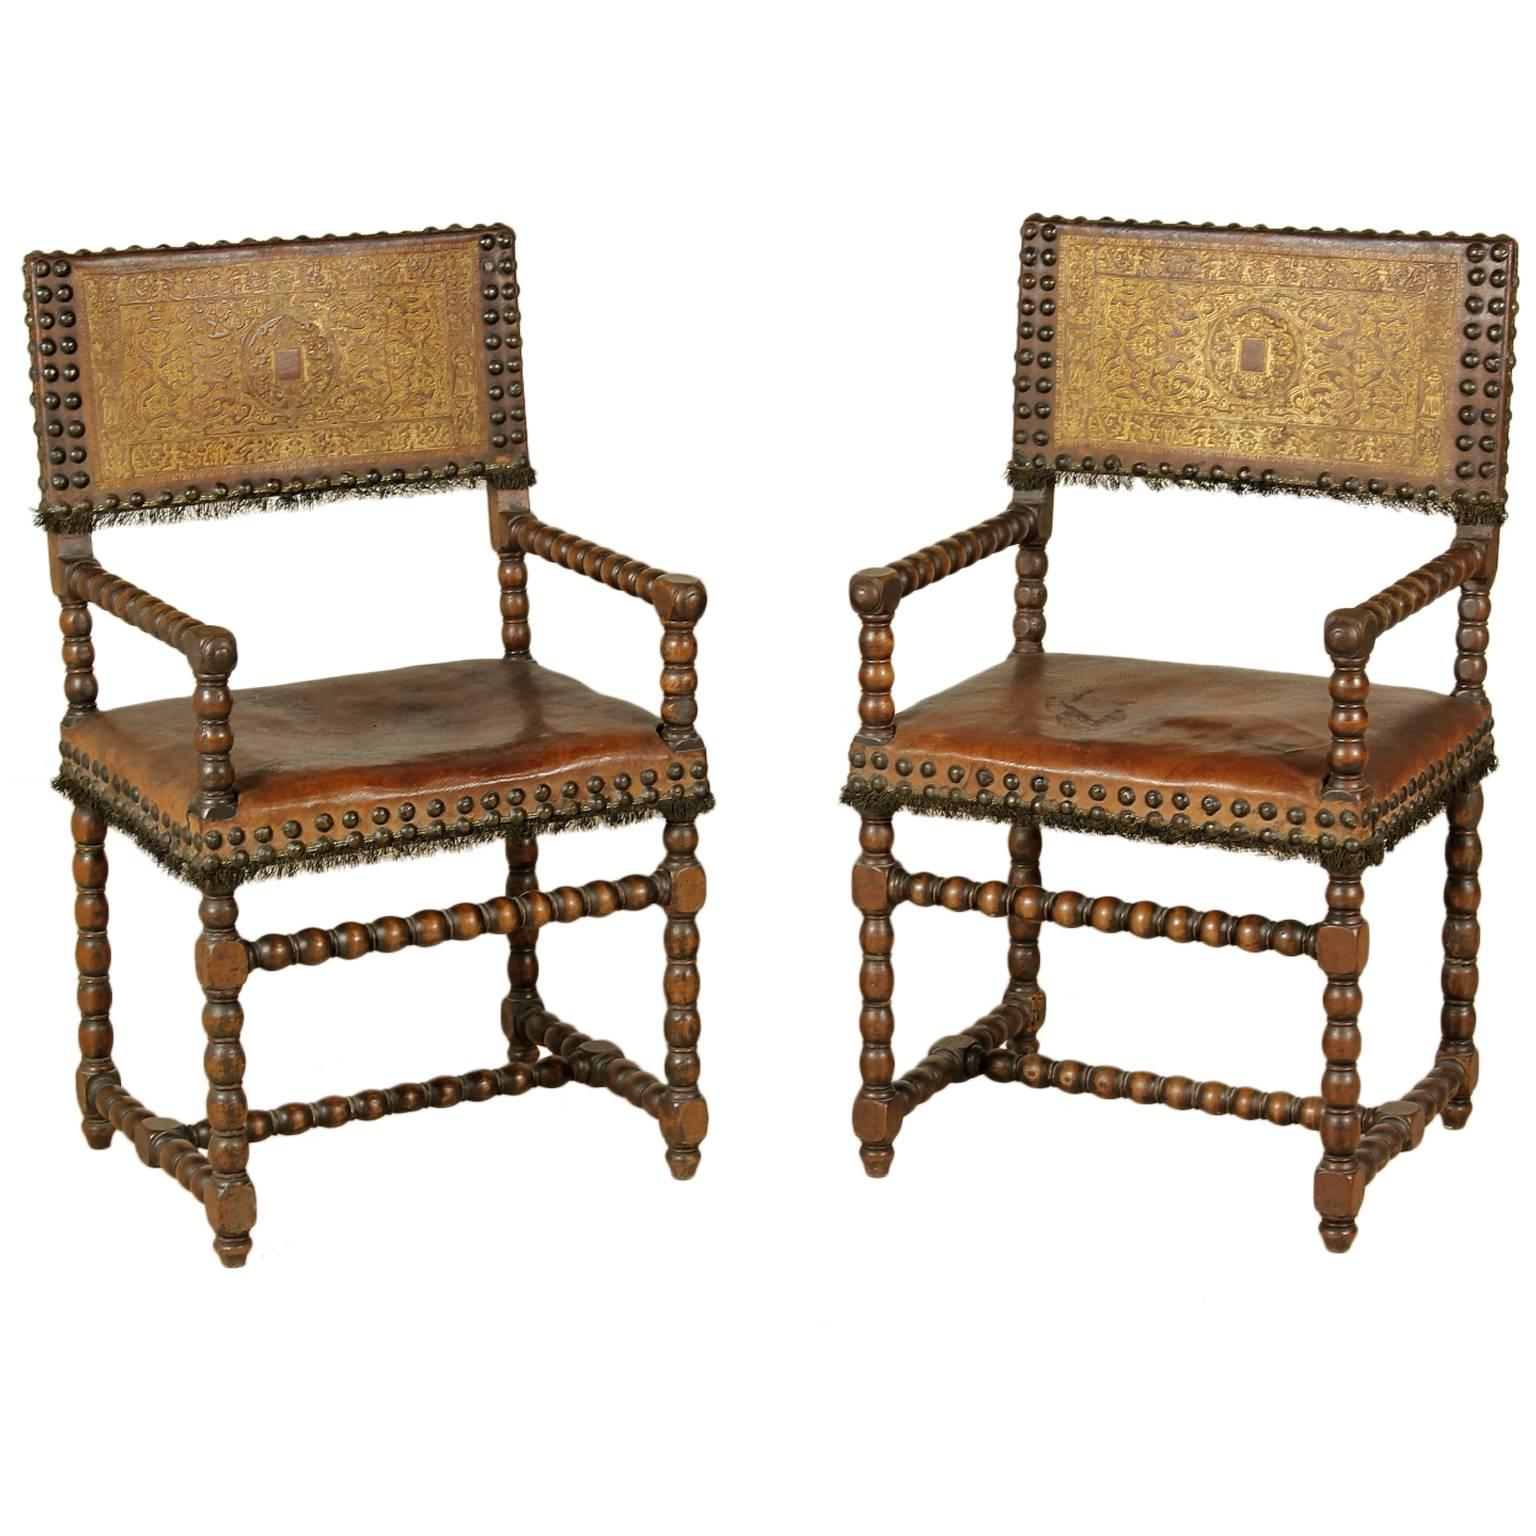 Two 17th Century Renaissance Walnut and Leather Armchairs